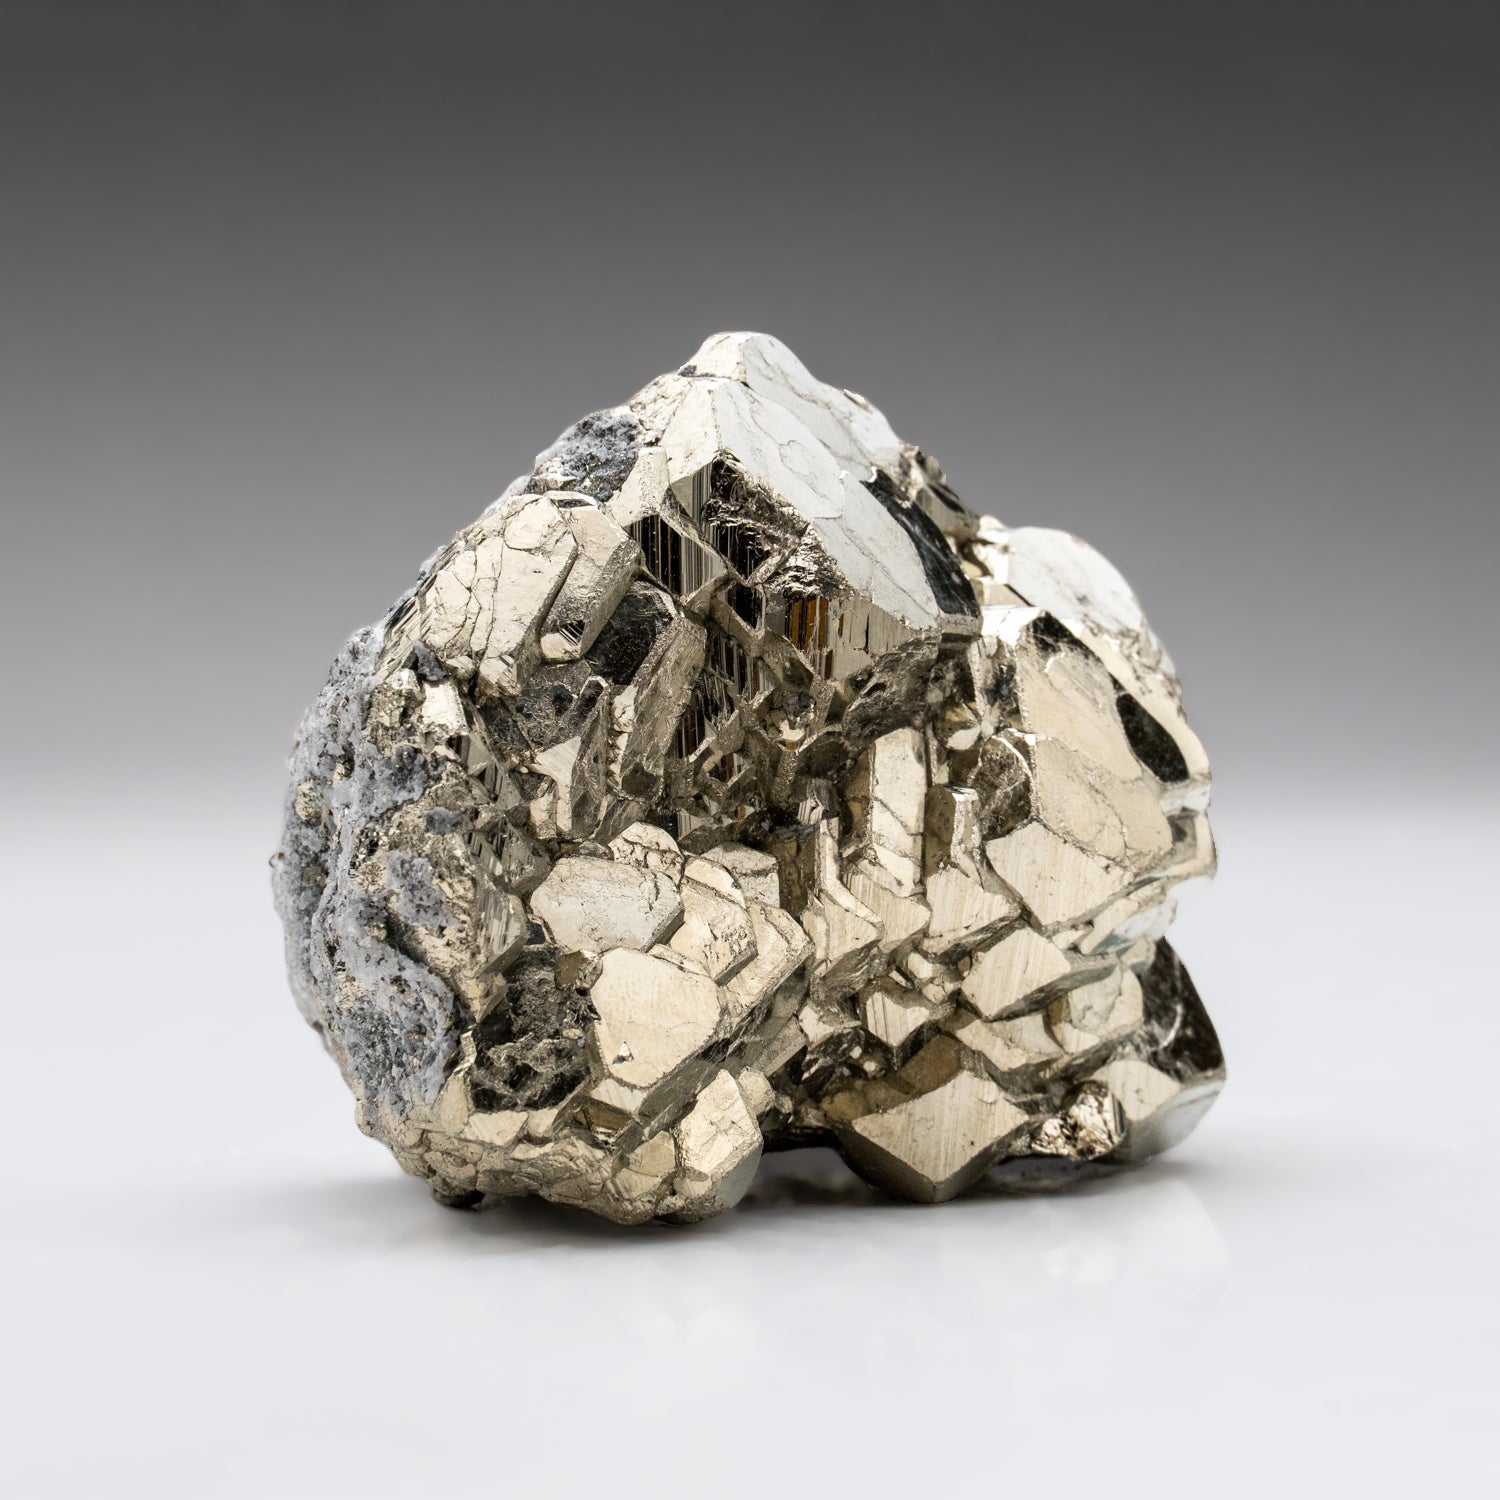 Pyrite Cluster from Huanuco Province, Peru (1.6 lbs)